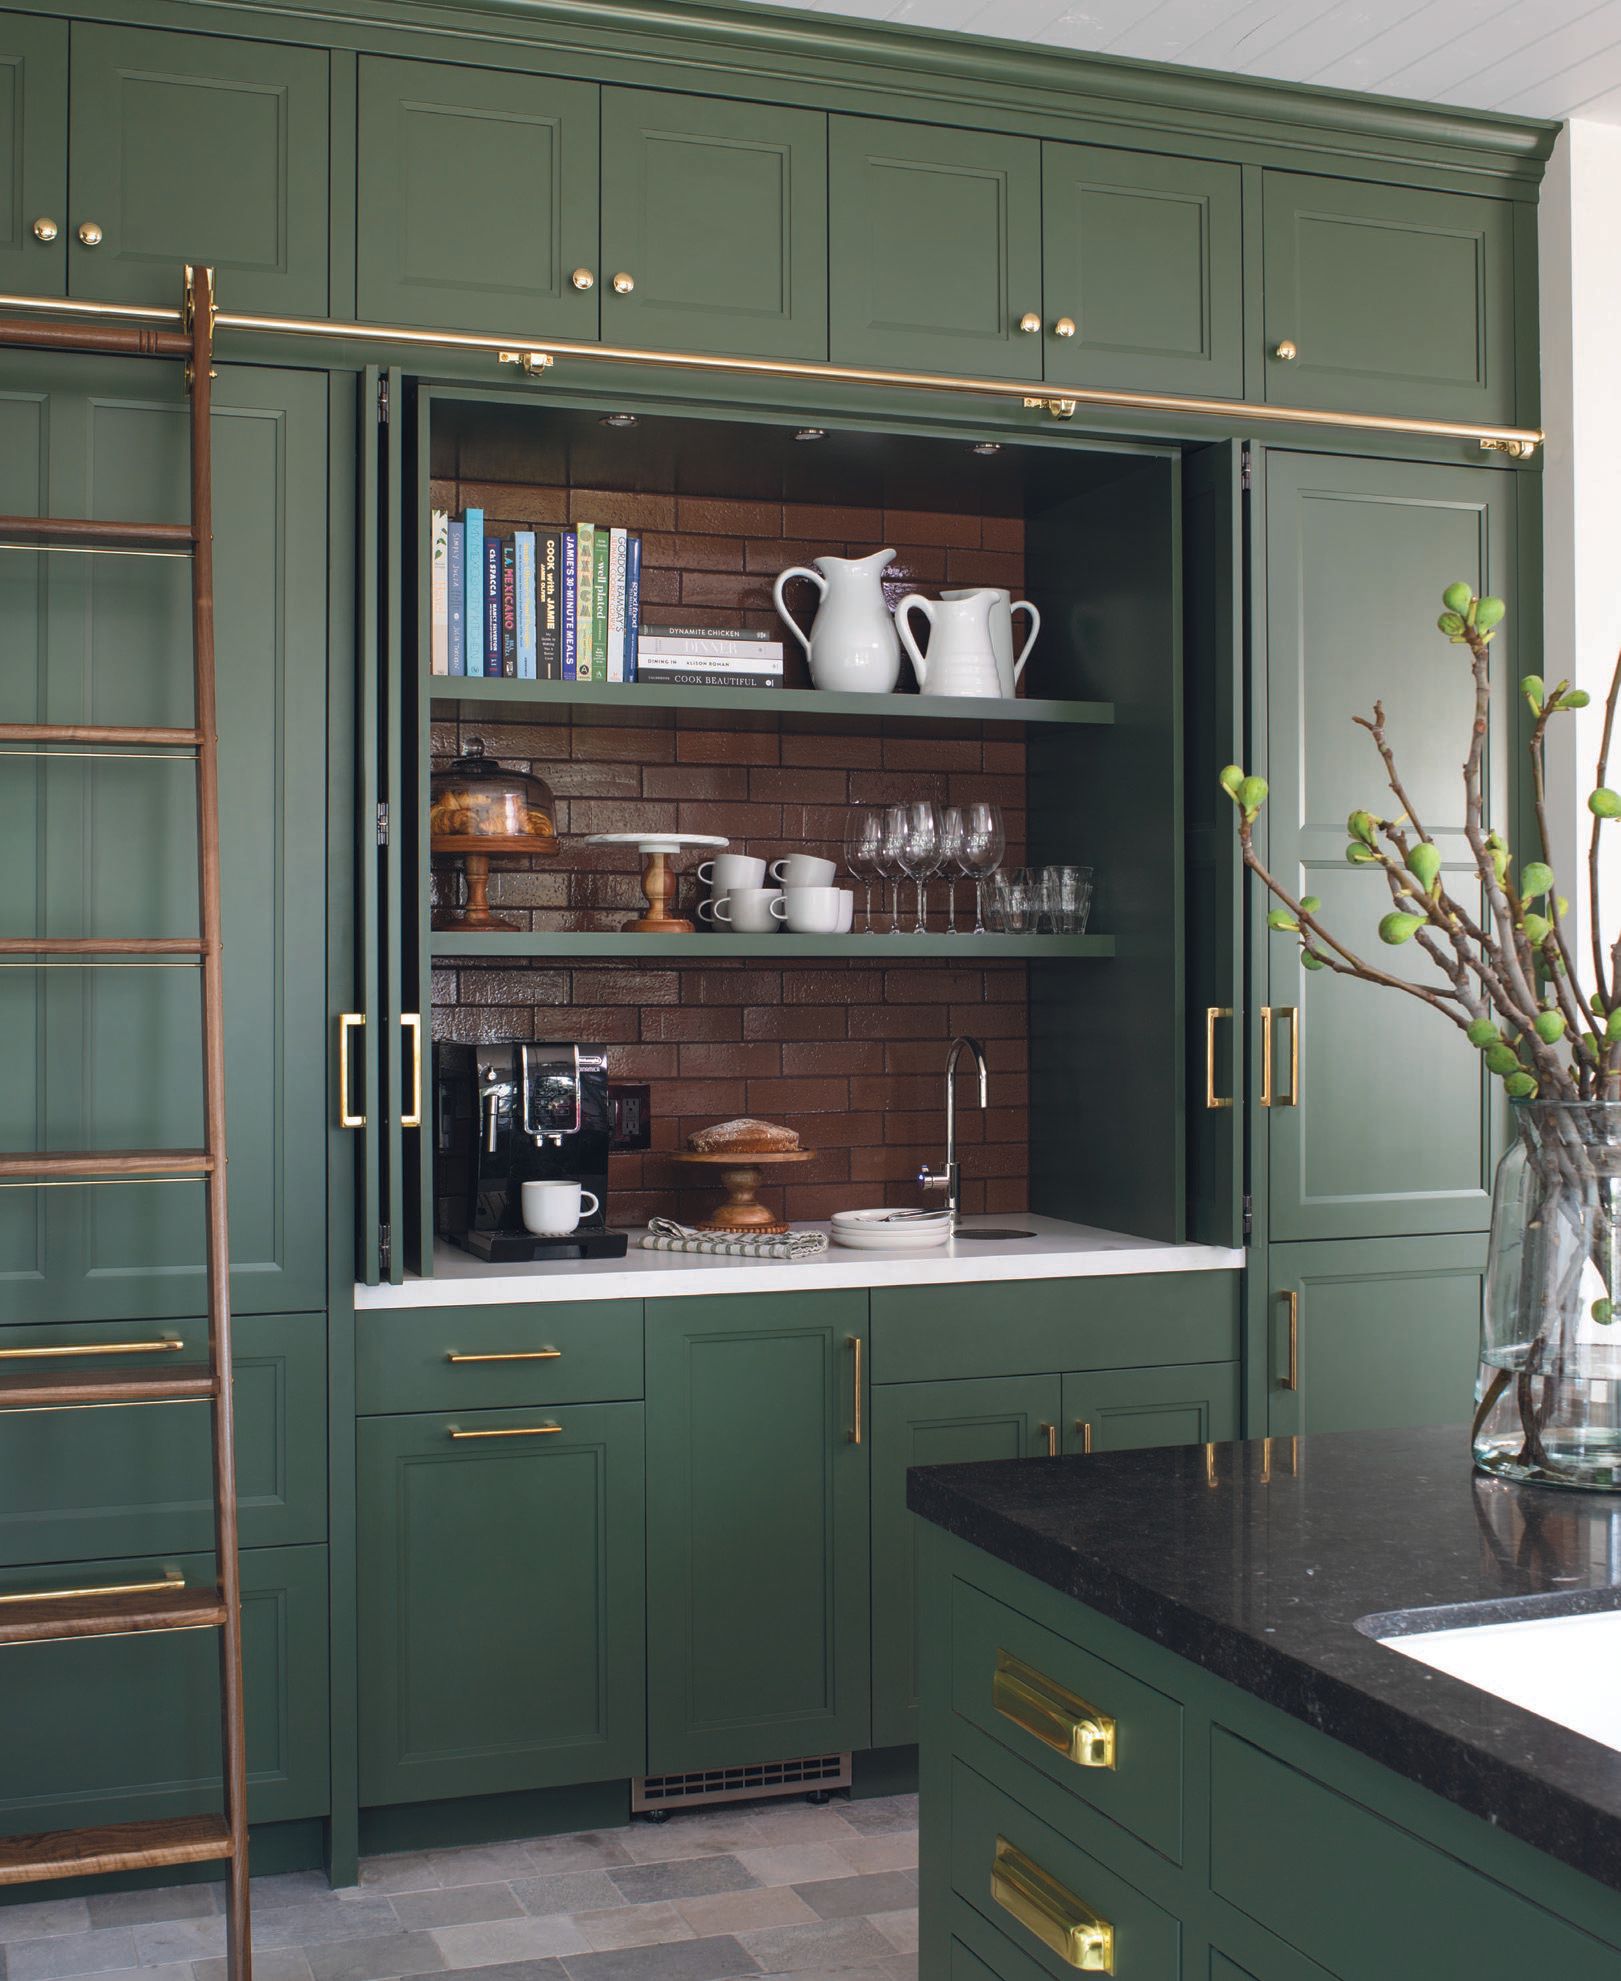 Rideau worked with Shawn Rabbani, CEO of Bellagio Design Build, on the project. The Wood Mode cabinets are painted in a custom green lacquer and adorned with brass hardware imported from England. PHOTO BY MEGHAN BEIERLE-O’BRIEN